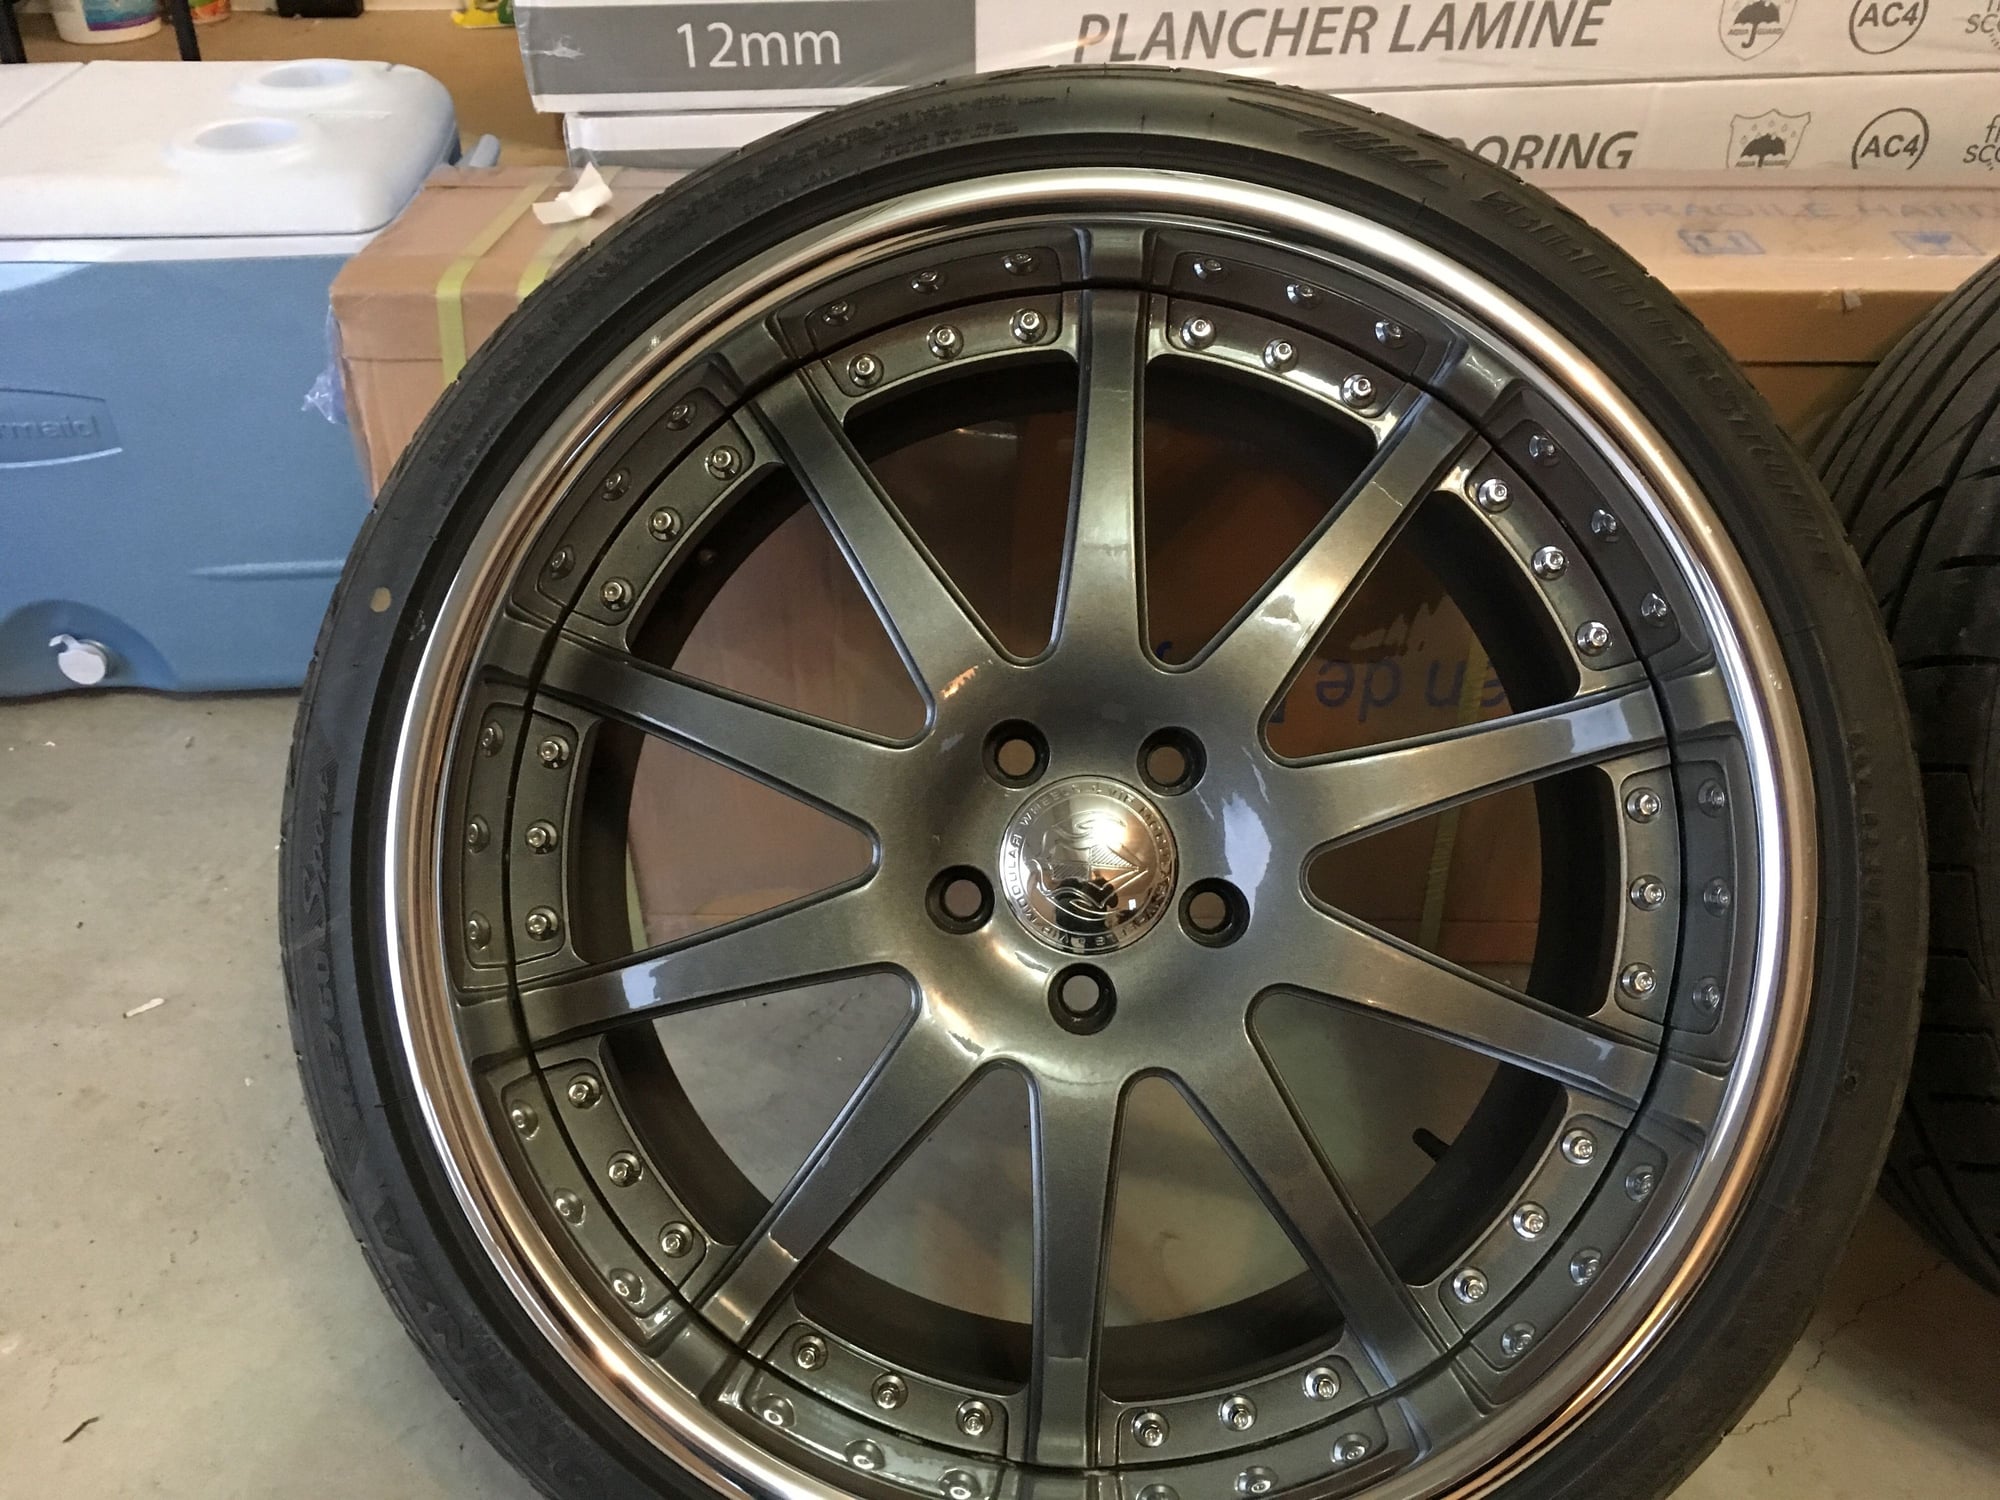 Wheels and Tires/Axles - 20" VIP Modular VR05 - Used - 2004 to 2014 Mercedes-Benz E63 AMG - Milton, ON L9E0G9, Canada